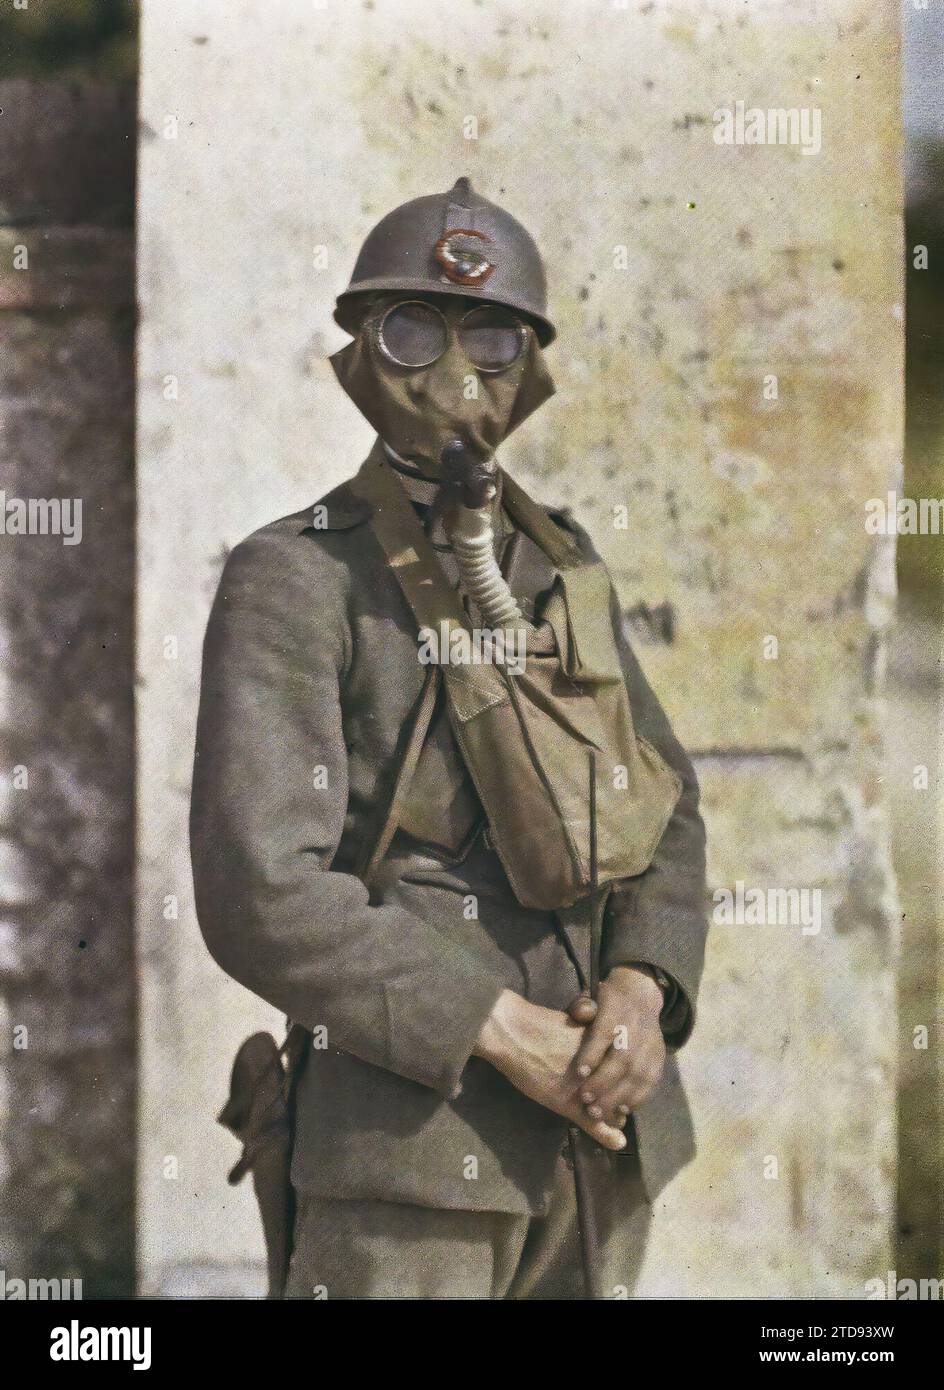 Between Castelfranco and Asolo, Italy Italian Carabinier with his mask, Clothing, Human Beings, First World War, Society, Military Uniform, Mask, Portrait, Back, Man, Army, Italy, Italian Carabinier with his mask, Castelfranco, Asolo, 10/06/1918 - 10/06/1918, Cuville, Fernand, 1918 - Italy - Fernand Cuville - (March-August), Autochrome, photo, Glass, Autochrome, photo, Positive, Vertical, Size 9 x 12 cm Stock Photo